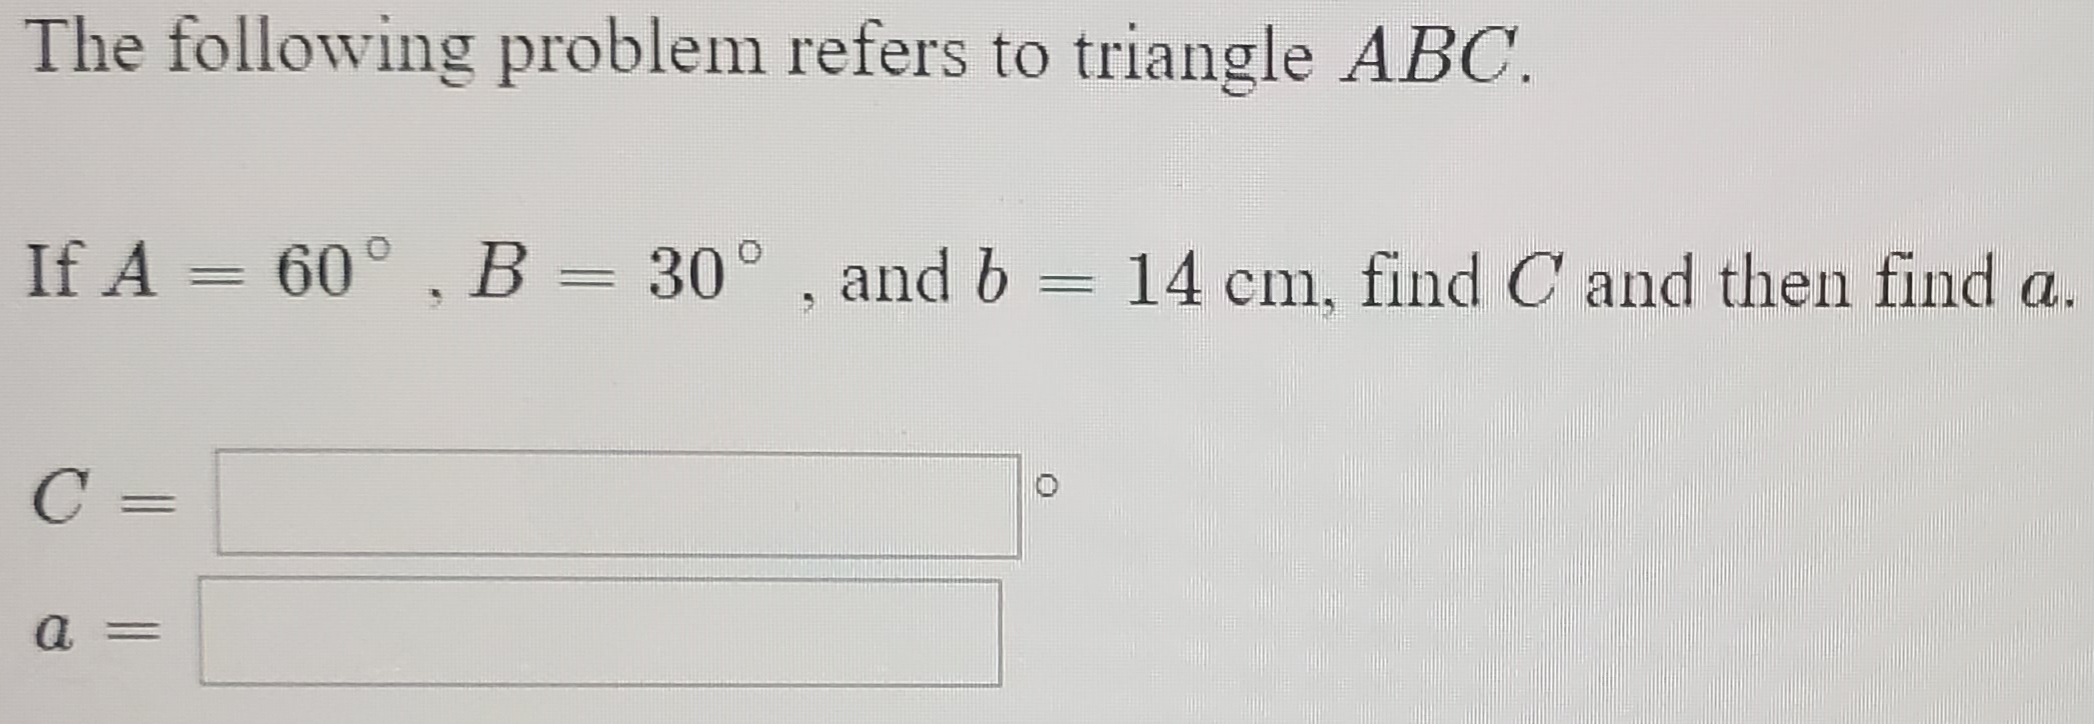 The following problem refers to triangle ABC.
If A = 60° , B = 30° , and b
14 cm, find C and then find a.
C =
a
%3D
